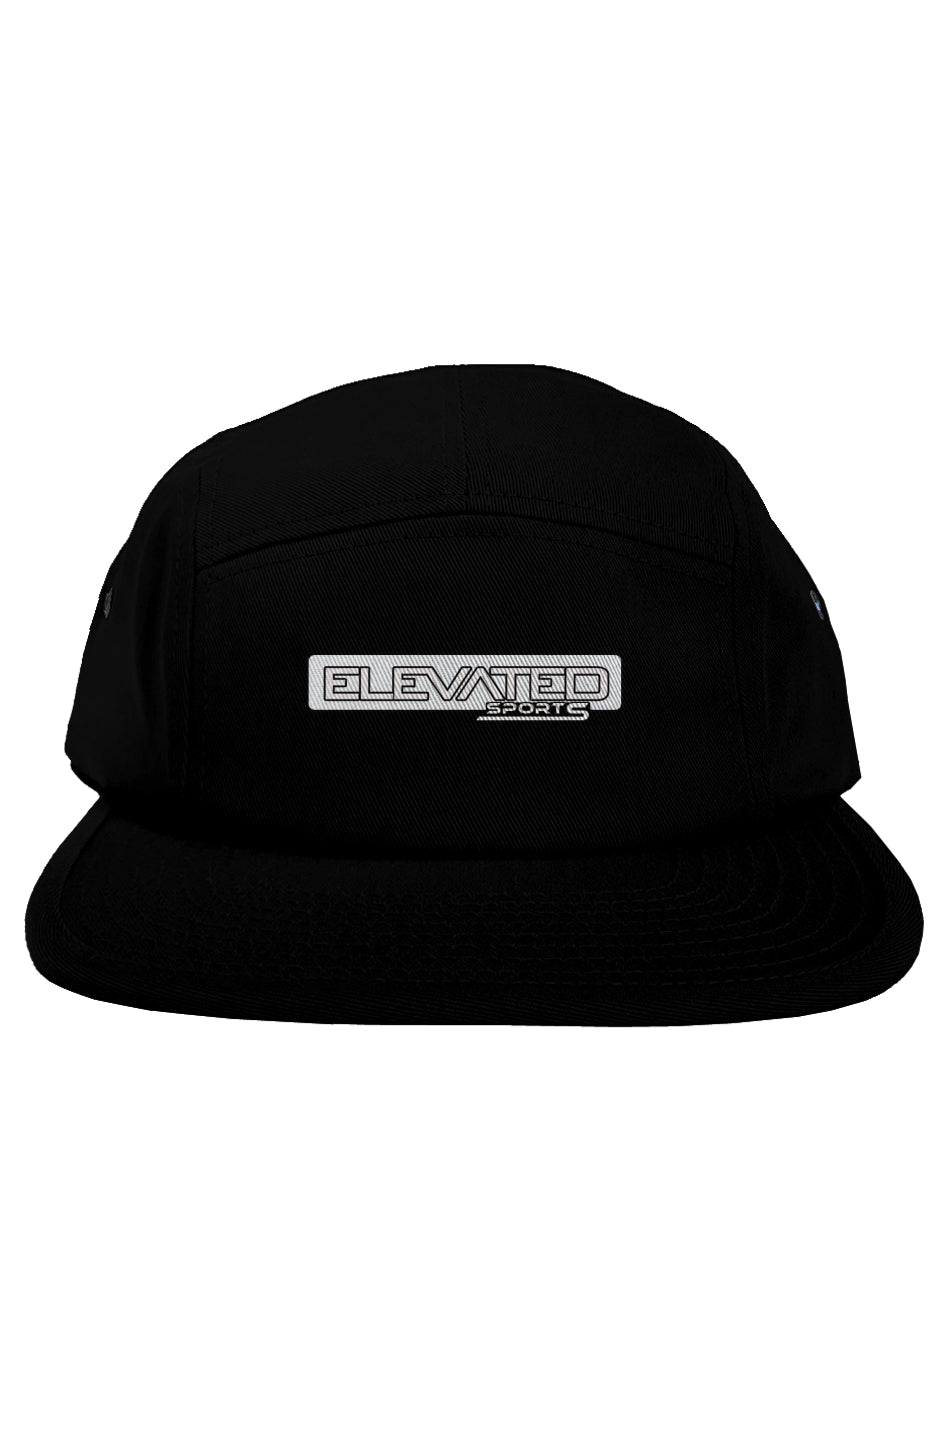 Embroidered Elevated Sports original 5 panel